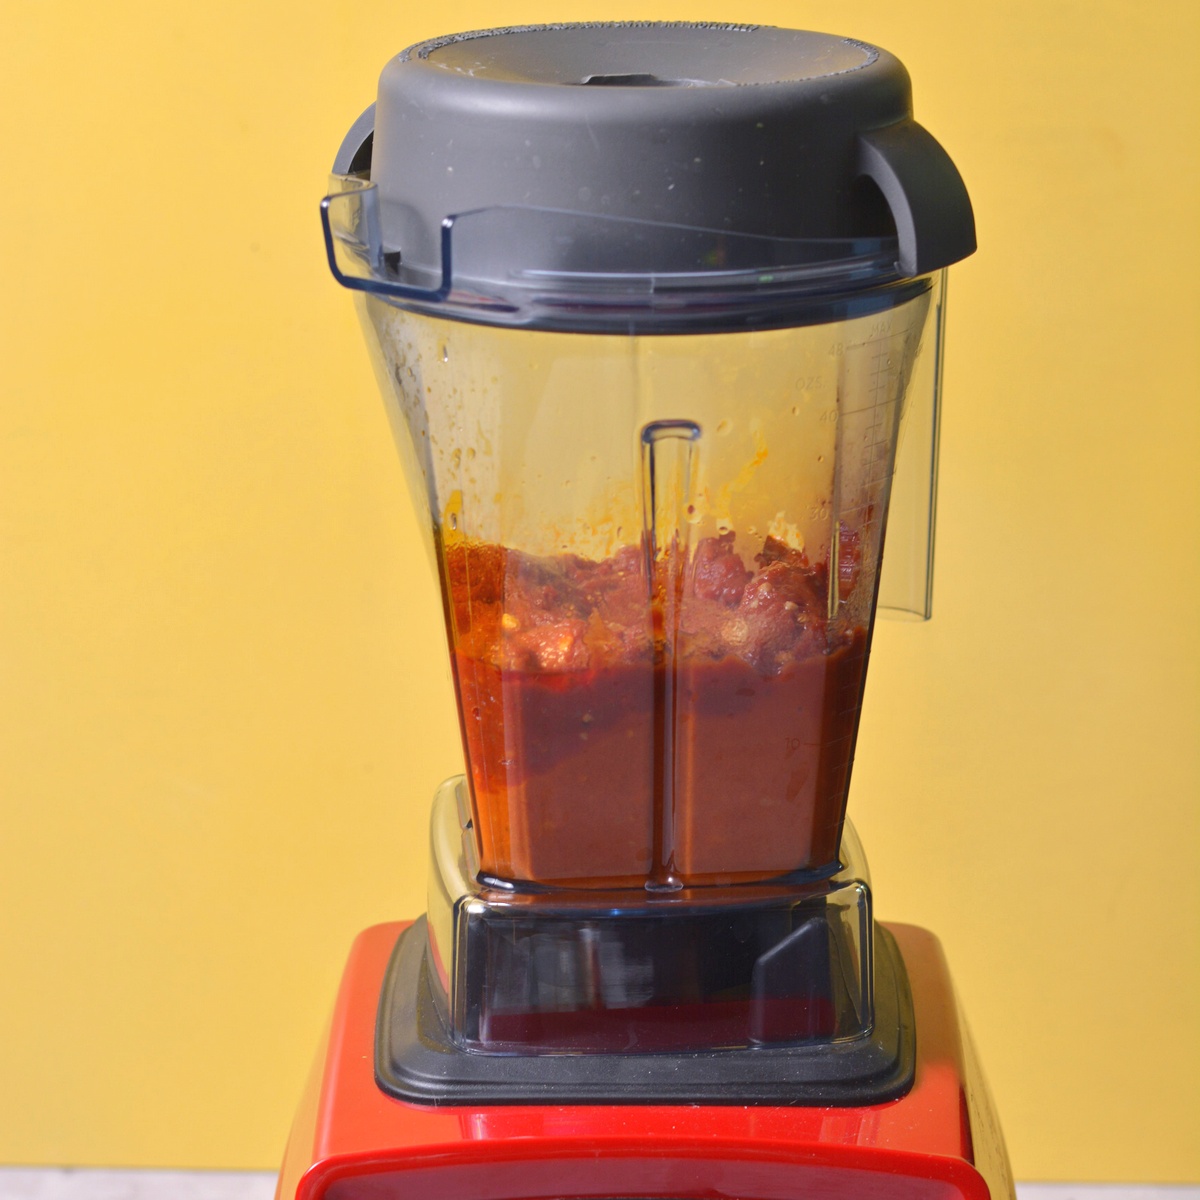 A blender with red pesto inside.